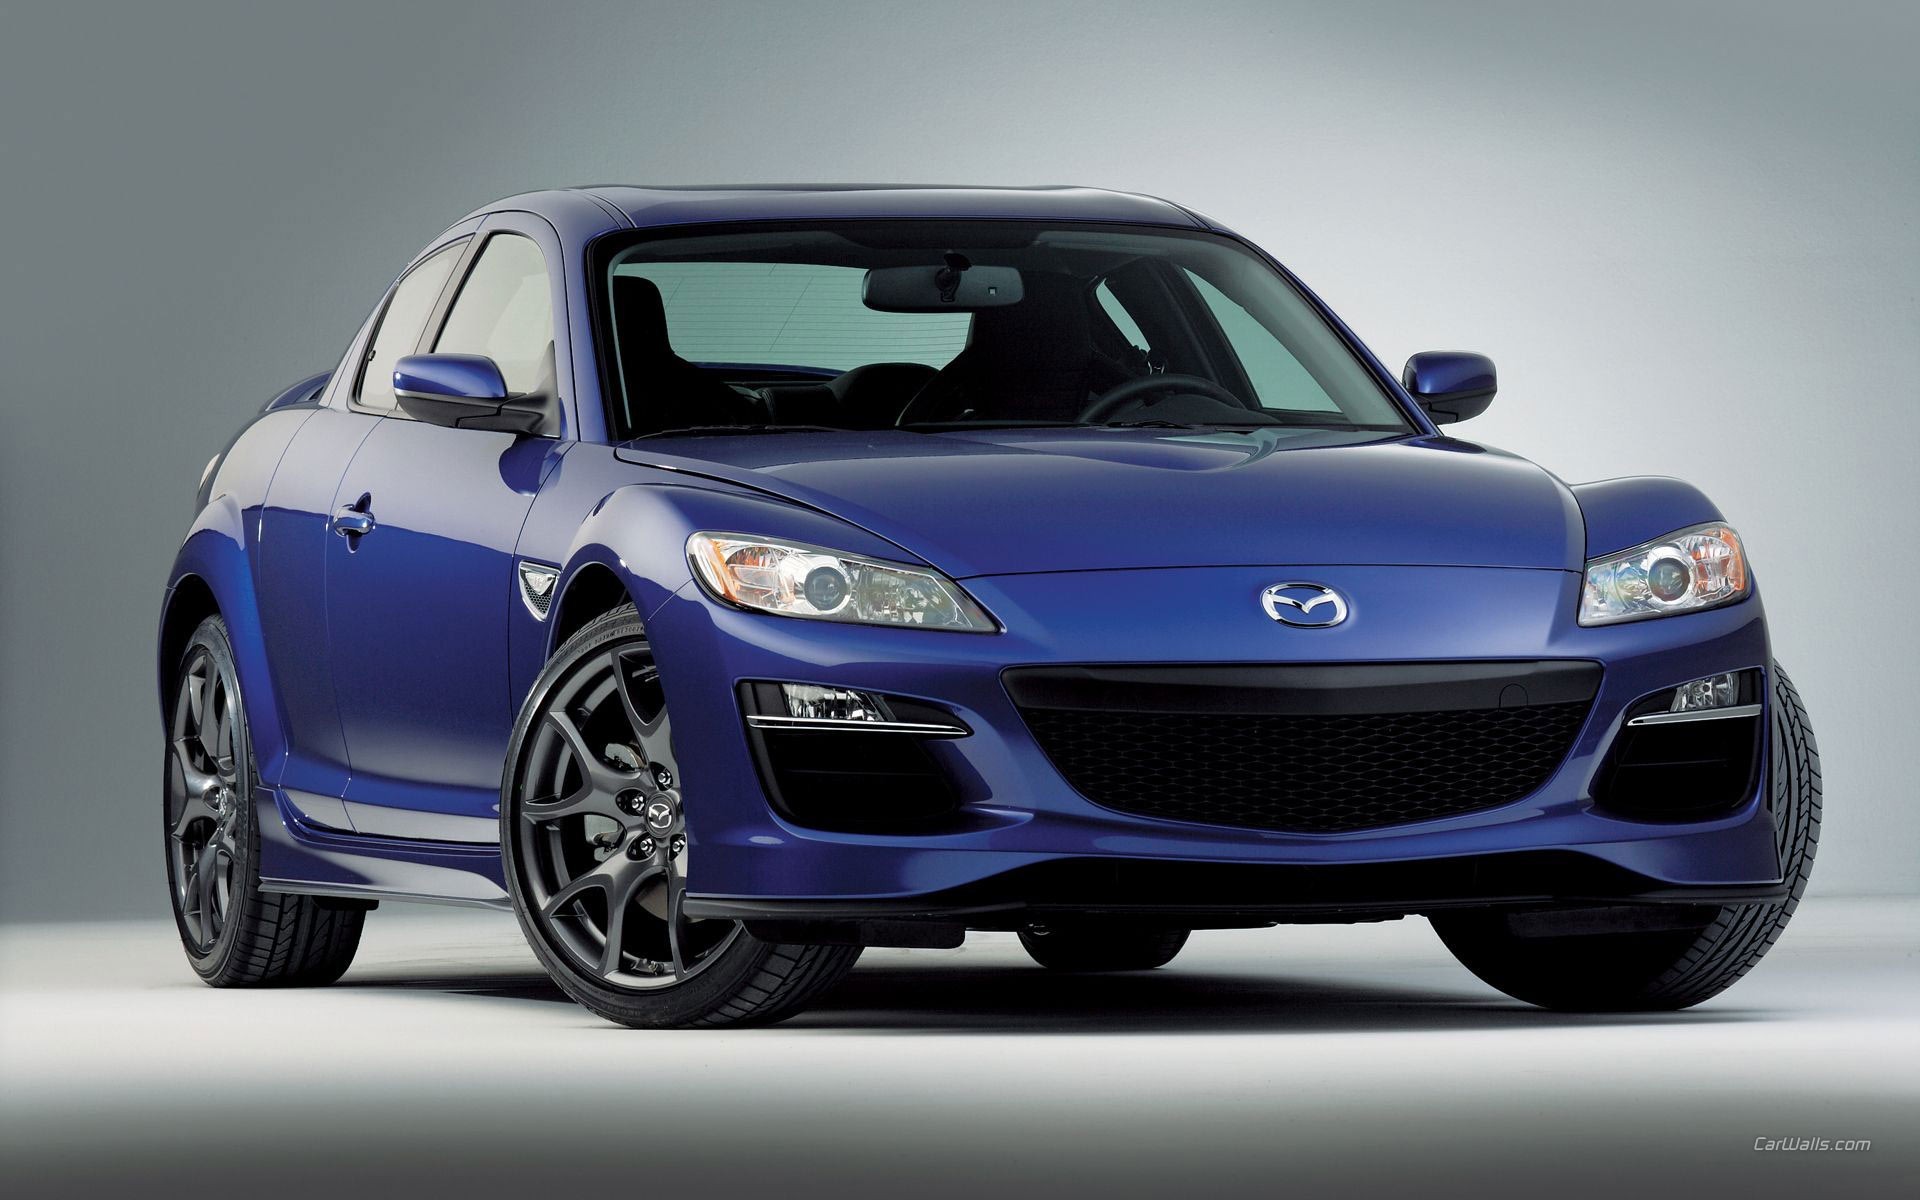 General 1920x1200 Mazda RX-8 blue cars Mazda Japanese cars car vehicle sports car simple background watermarked